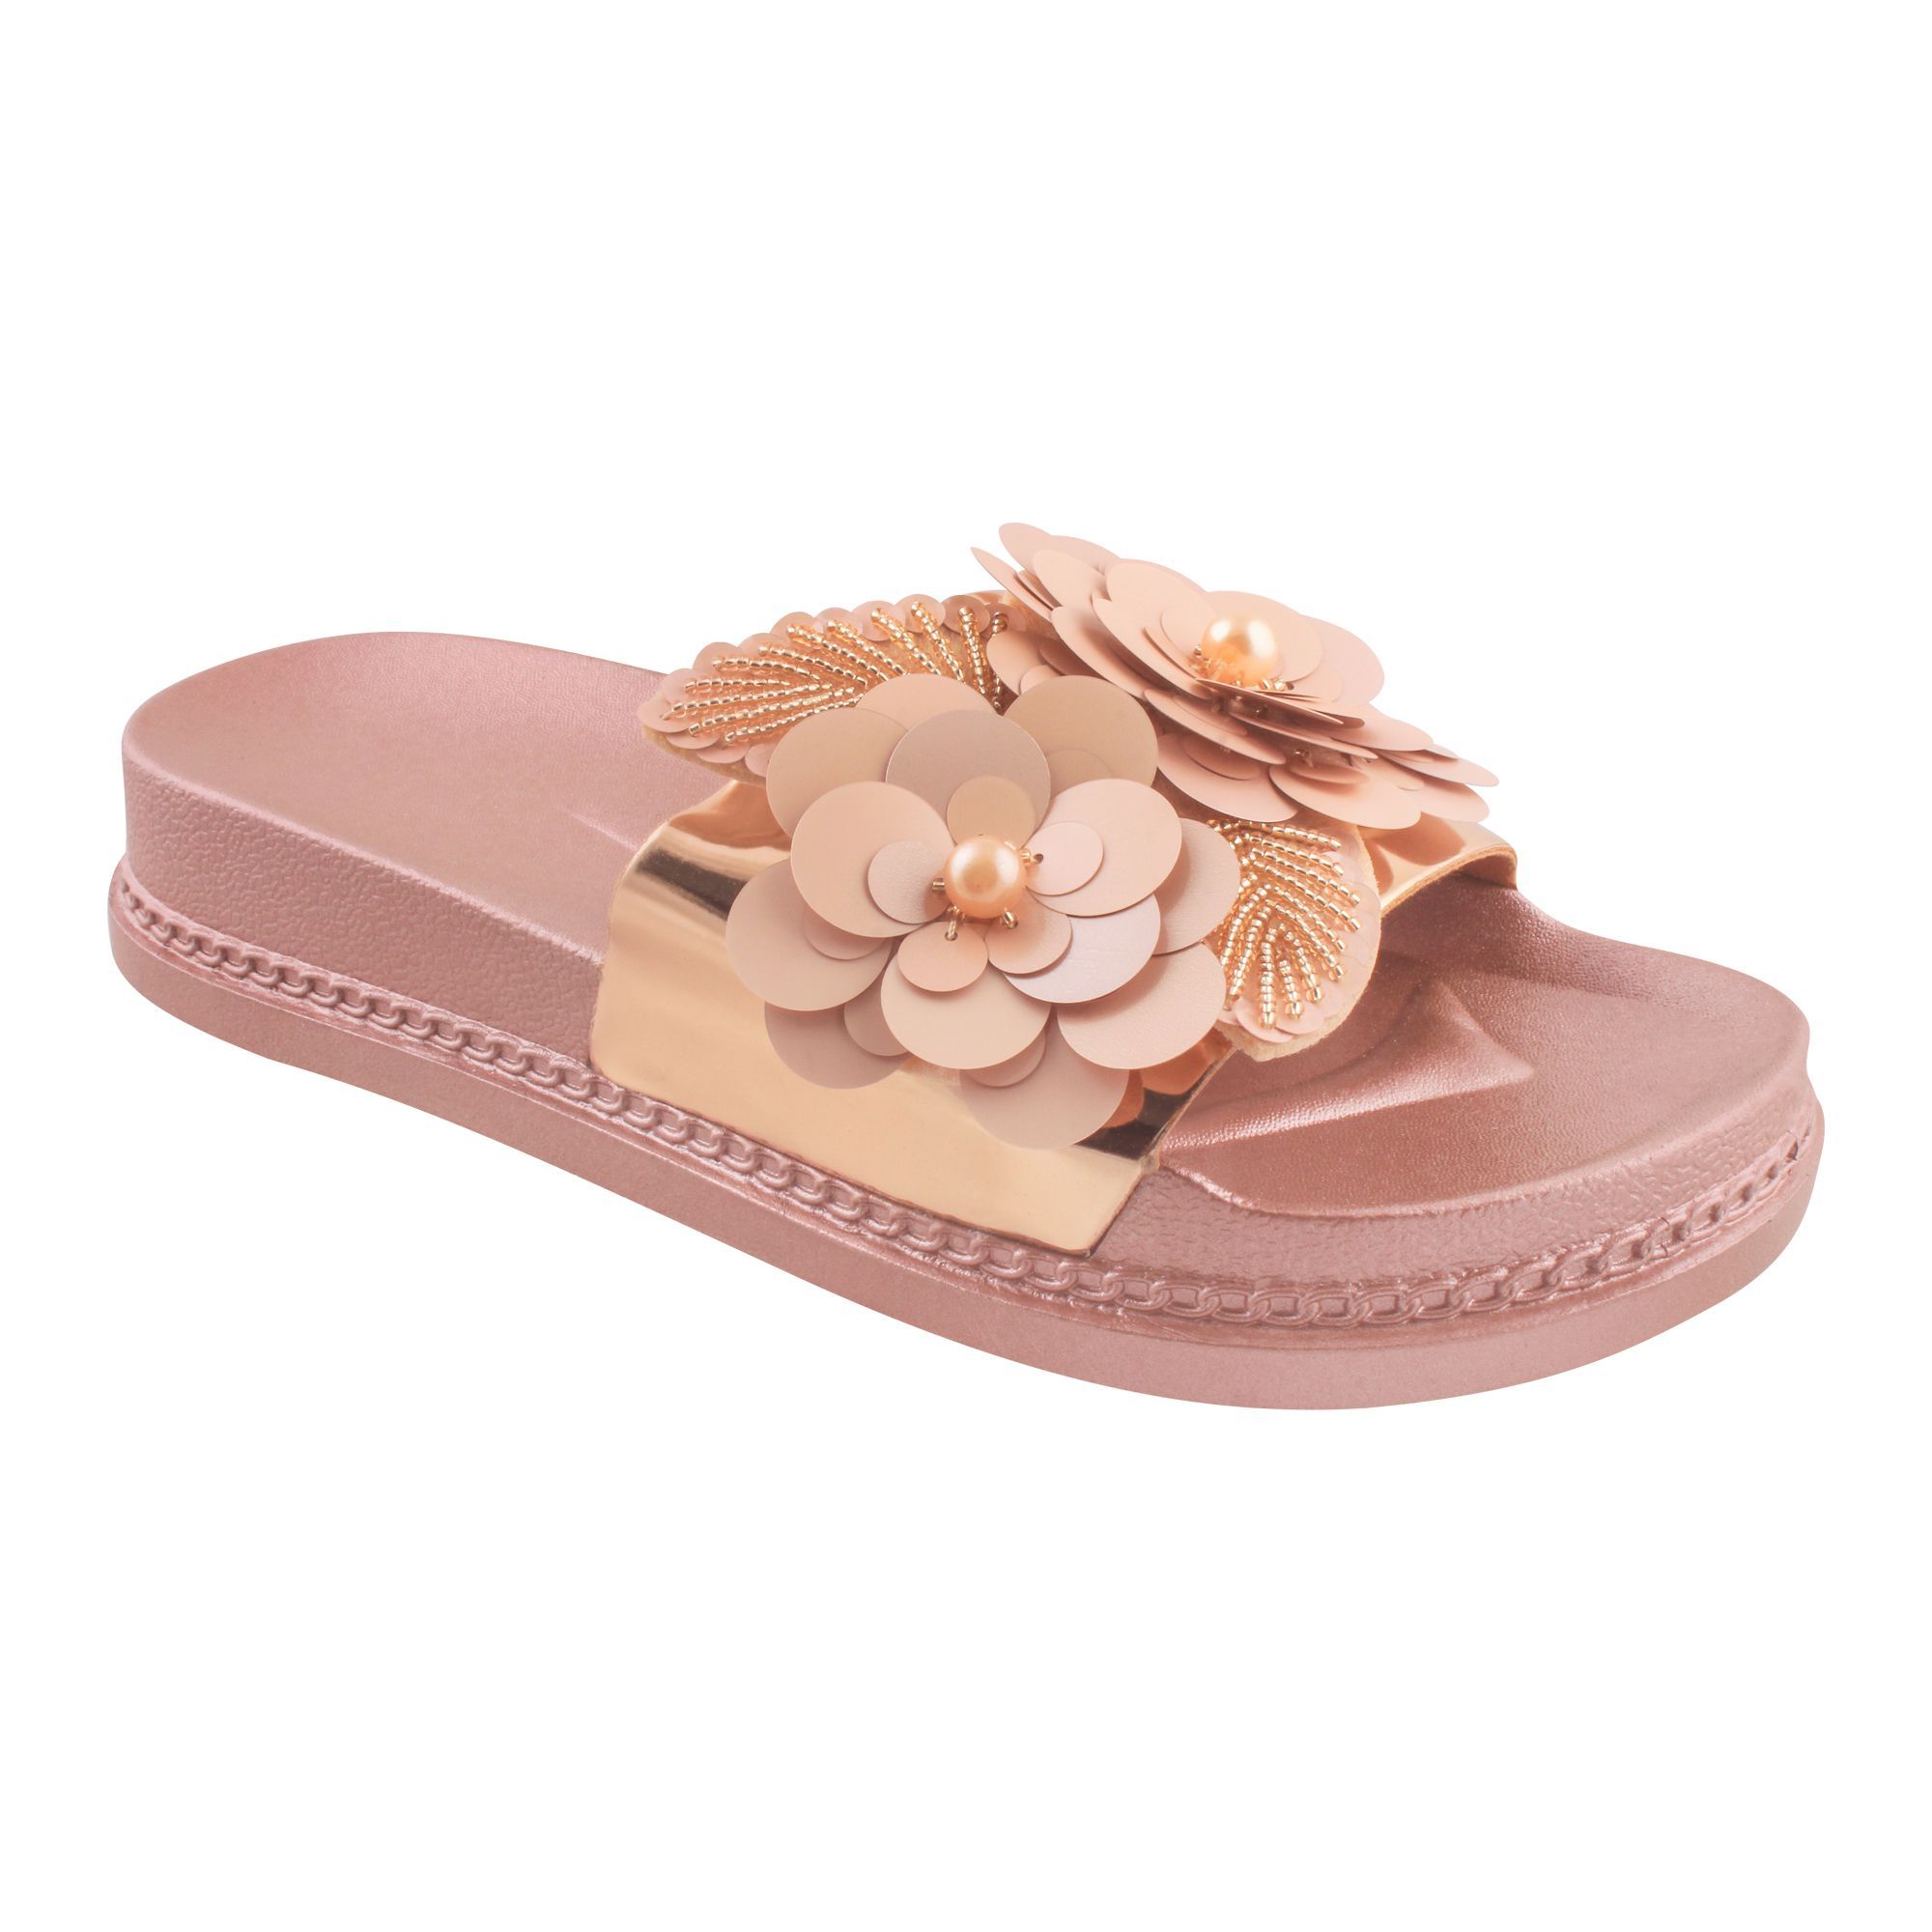 Buy Women's Slippers, A-10, Copper Online at Best Price in Pakistan ...